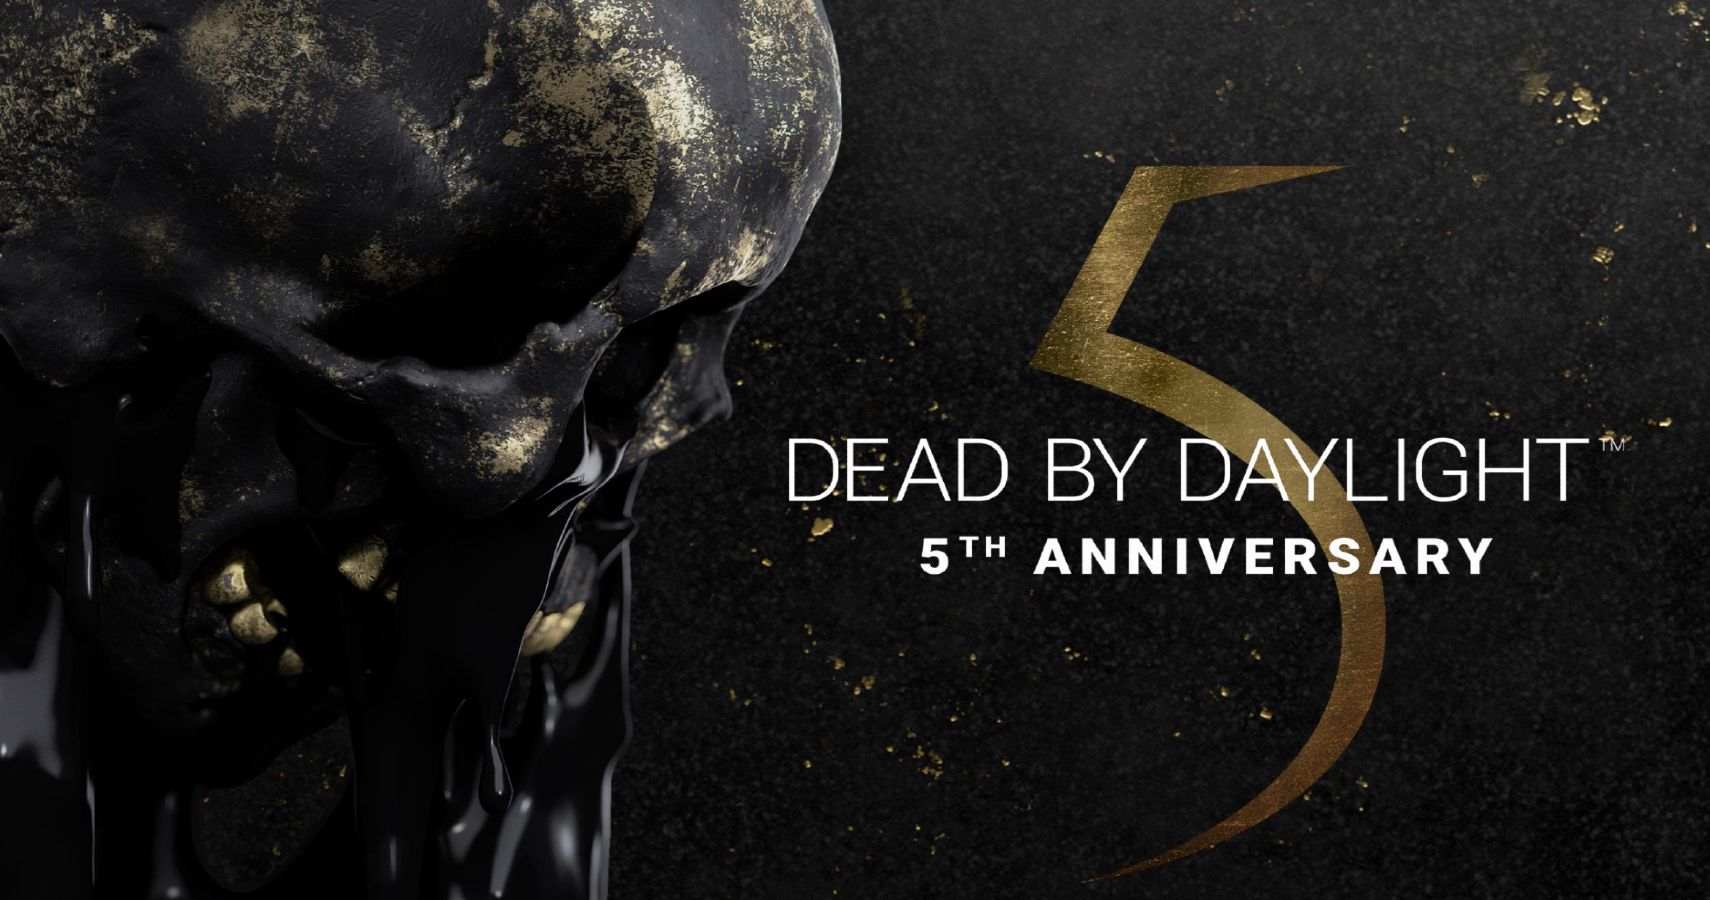 Dead by Daylight Anniversary Event Image 2021